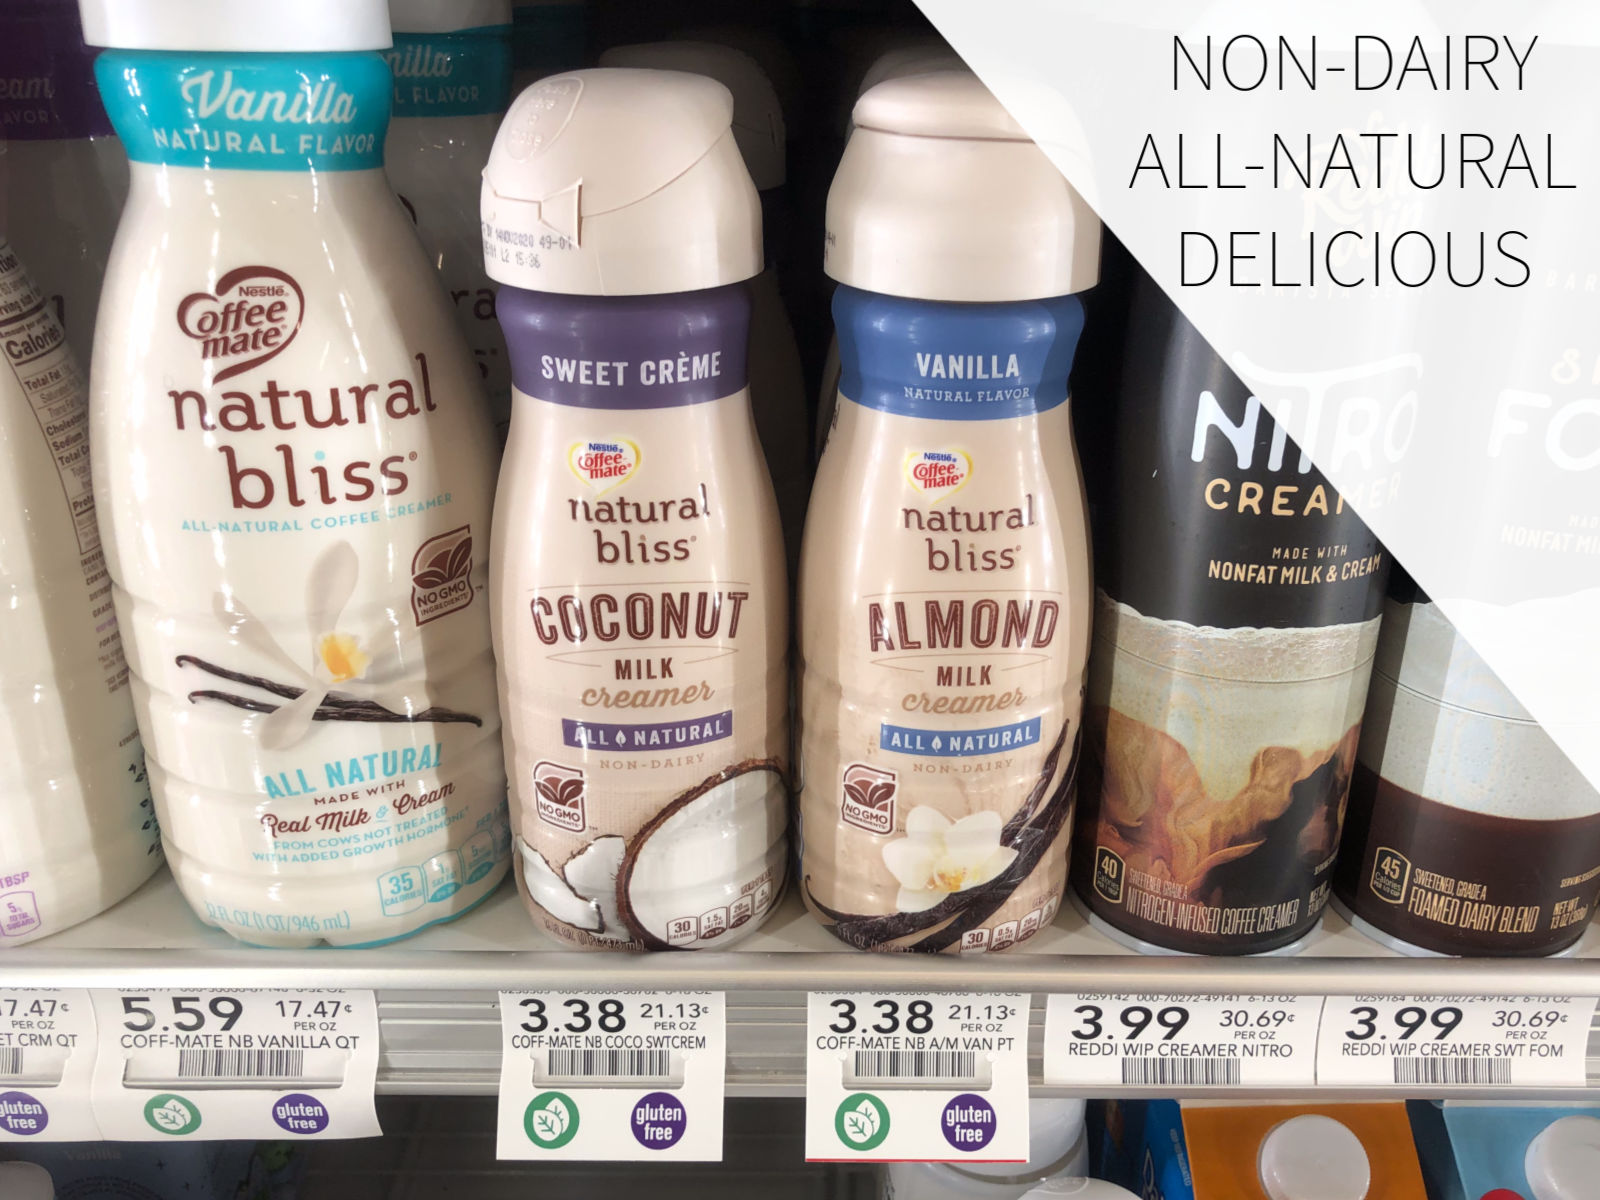 Try natural bliss® Sweet Crème Coconut Milk & natural bliss® Vanilla Almond Milk & Enjoy All-Natural, Non-Dairy Deliciousness! on I Heart Publix